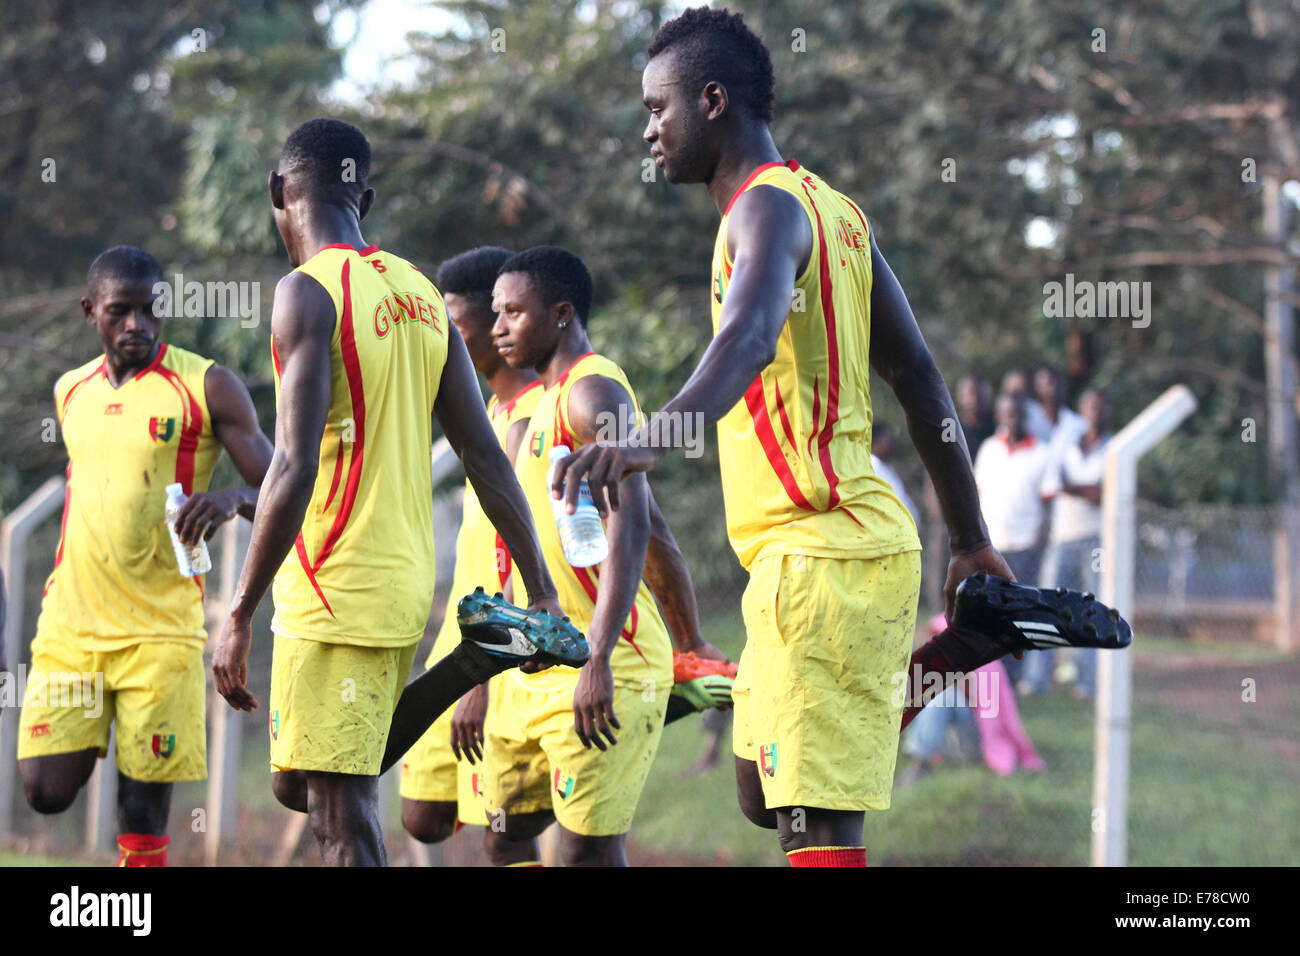 Kampala, Uganda. 8th September, 2014. Some of the Guinea national football team players pictured warming up in Kampala as they prepare to take on hosts Uganda Cranes in an Africa Cup of Nations qualifier on Wednesday September 10th, 2014. Despite the threat of Ebola outbreak, Uganda is to host Guinea in the Africa Cup of Nations soccer qualifier. The disease has so far killed 2,100 people in the West African countries of Guinea, Liberia, Sierra Leone and Nigeria, according to the World Health Organization. Credit:  Samson Opus/Alamy Live News Stock Photo